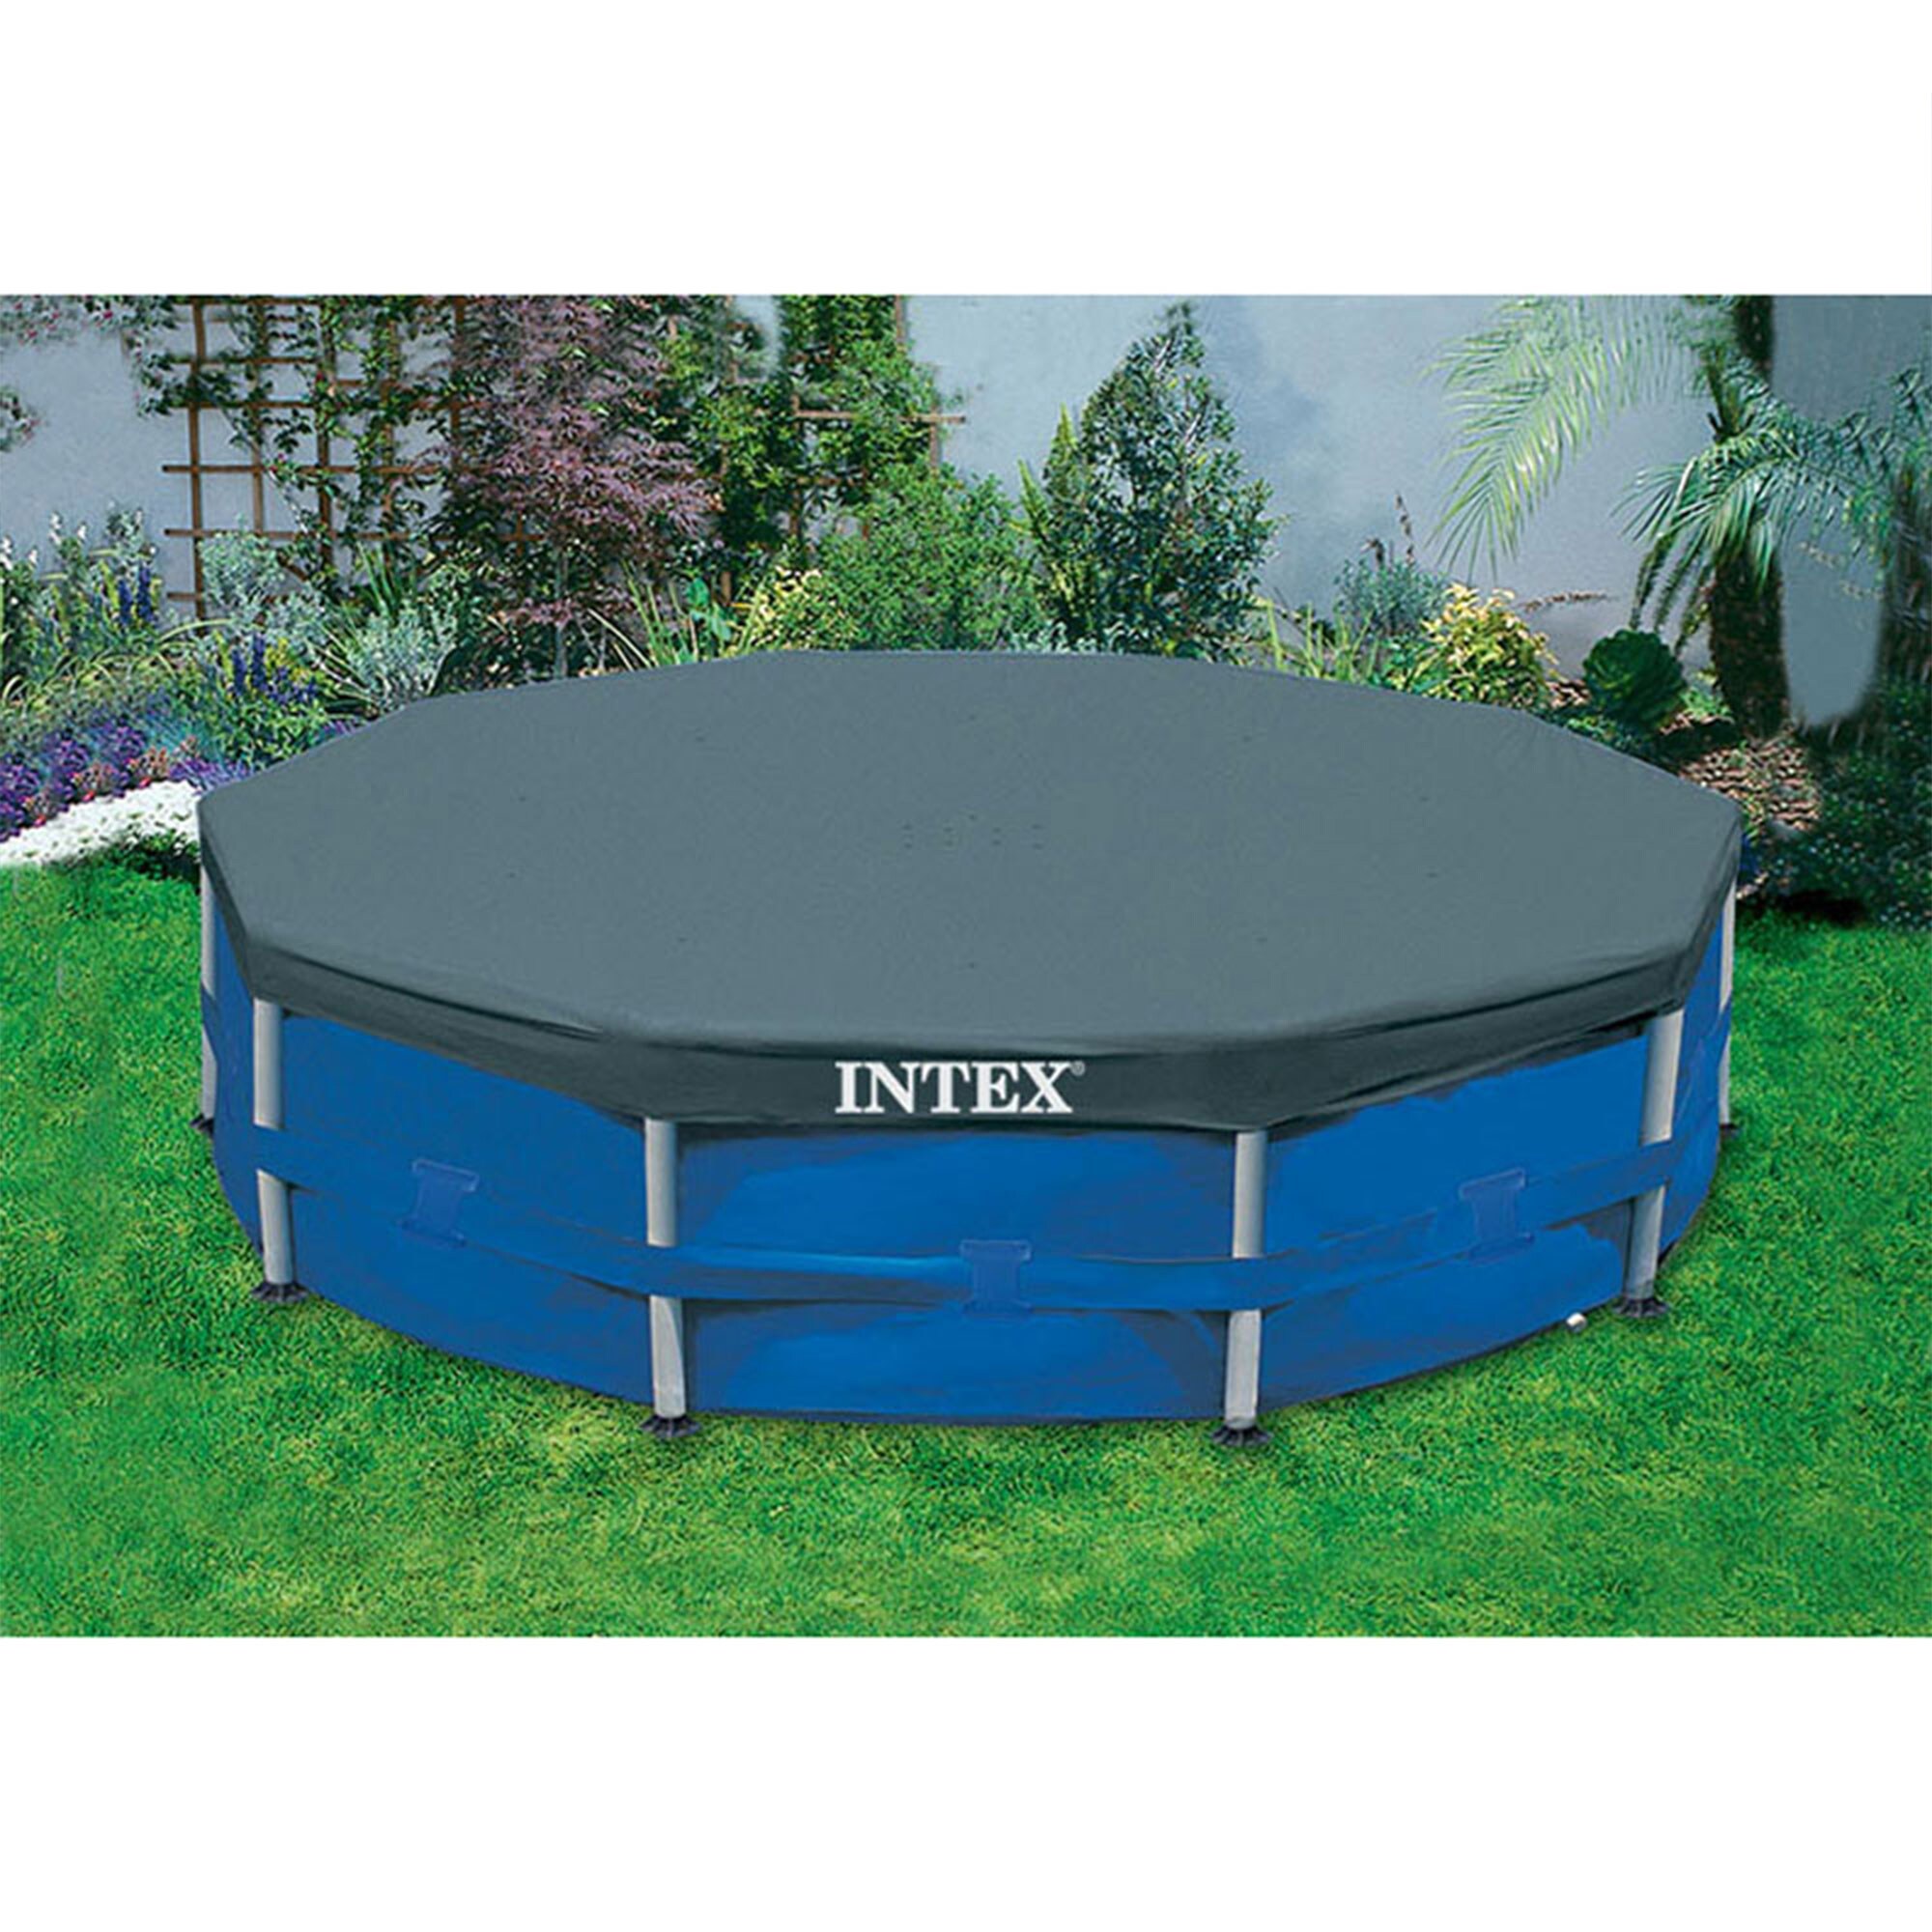 Intex 10-ft x 10-ft x 30-in Metal Frame Round Above-Ground Pool